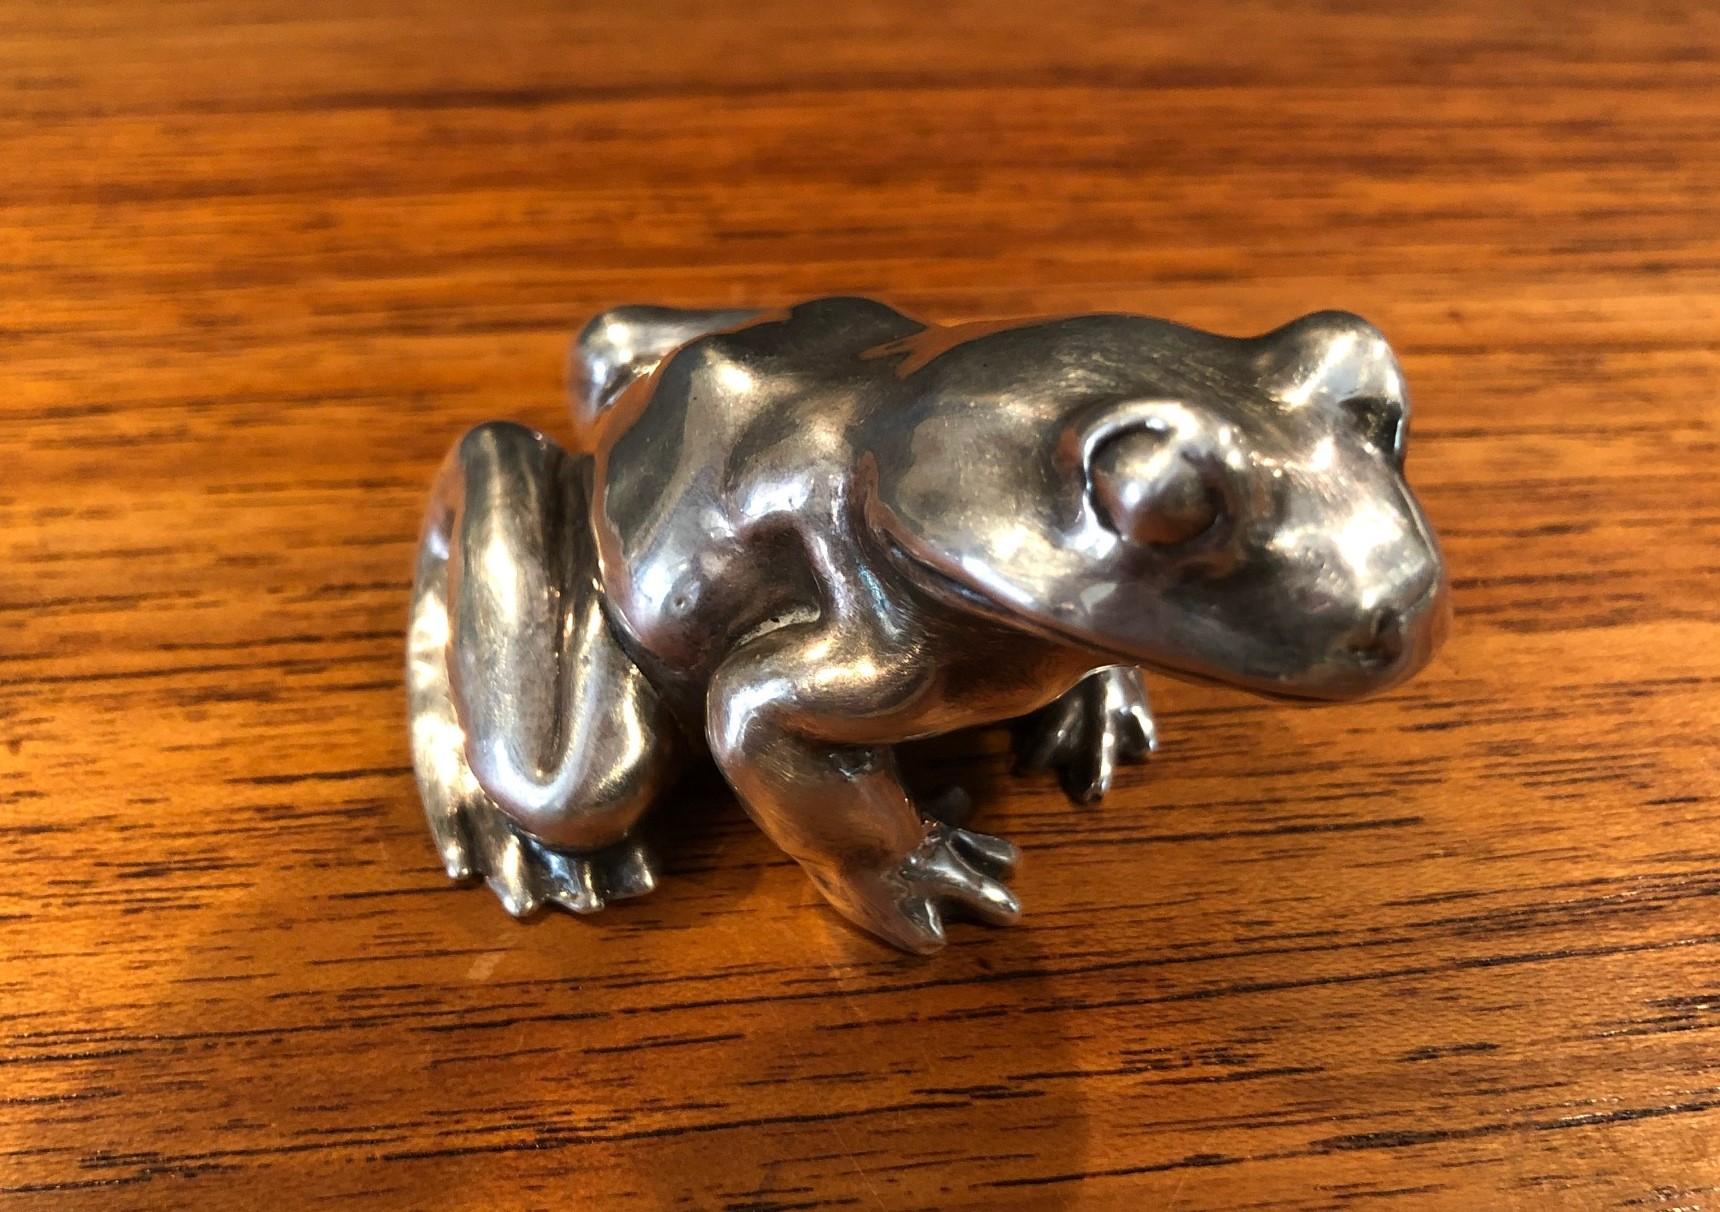 A very cool sterling silver frog / toad sculpture, circa 1970s. The frog is 3